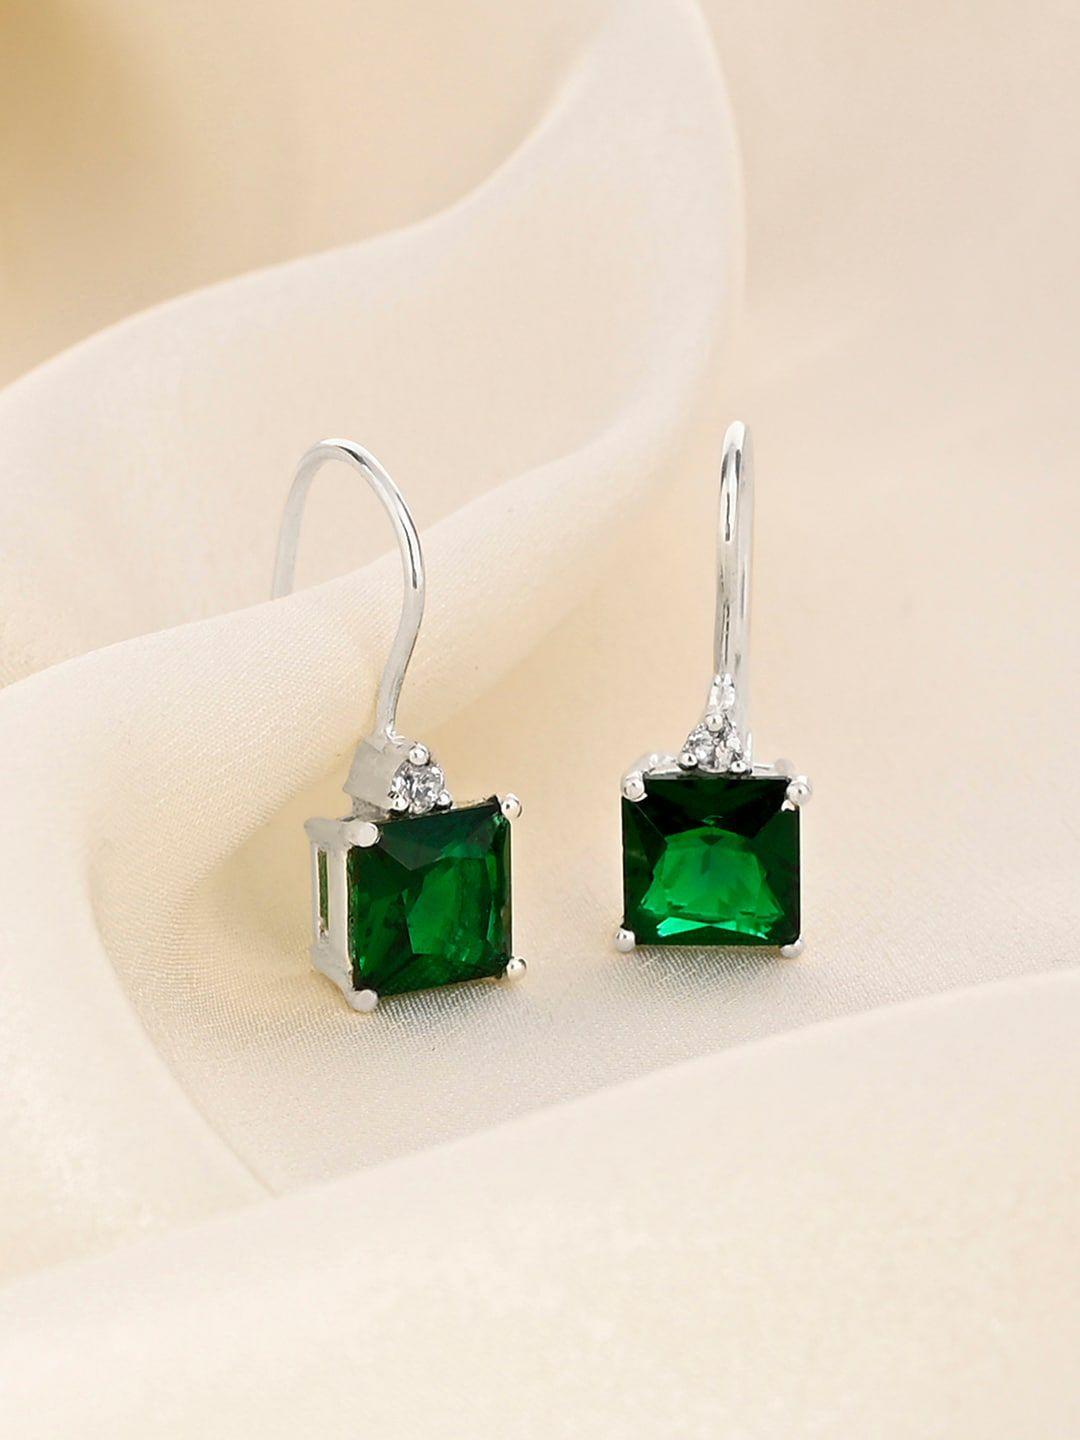 mikoto by fablestreet 925 sterling silver rhodium-plated green zircon handcrafted earrings